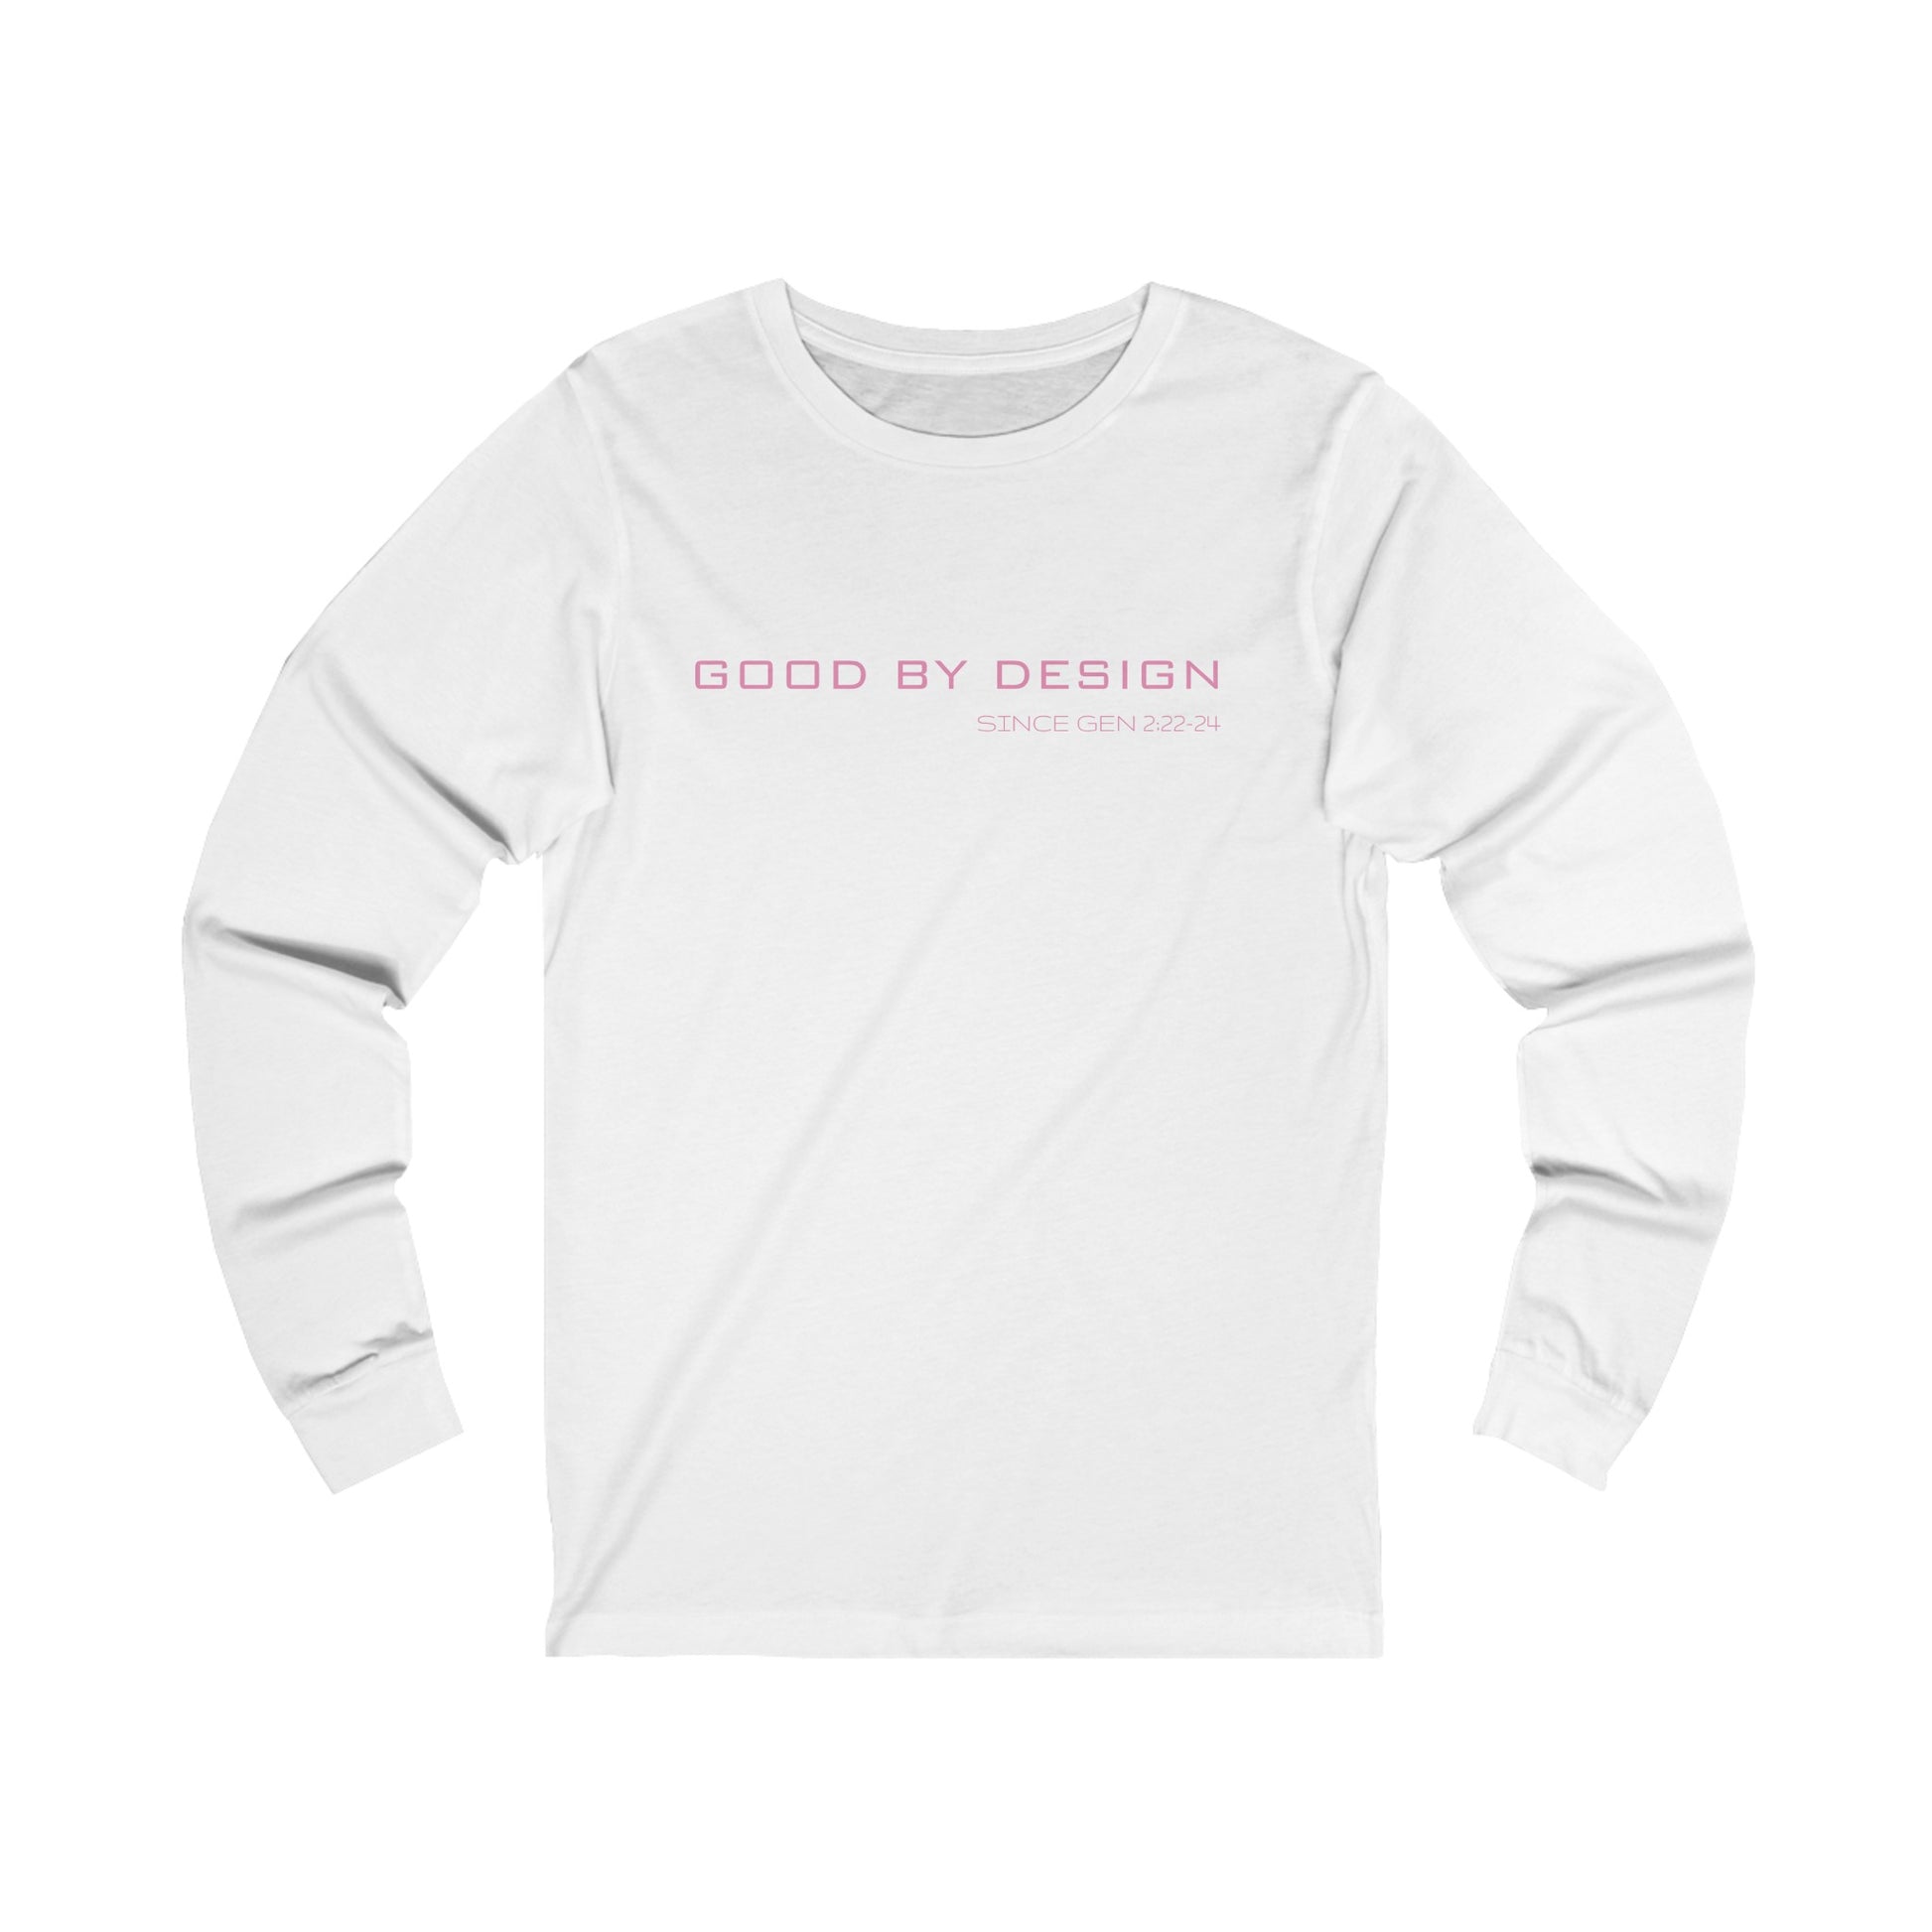 Good By Design Women's Long sleeve tee in white